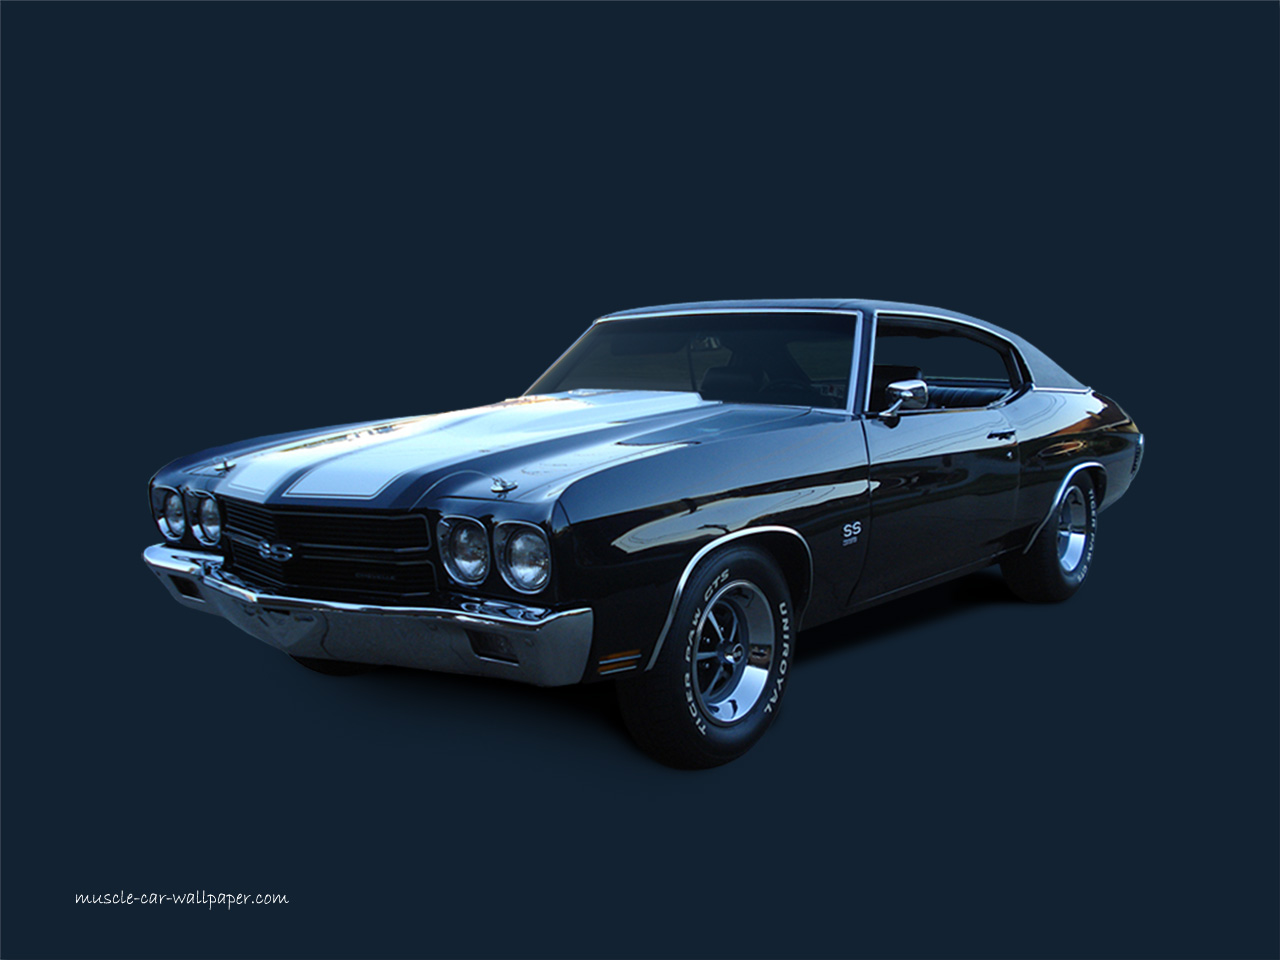 Chevelle SS Wallpaper 1970 Blue Coupe 1280x960 02